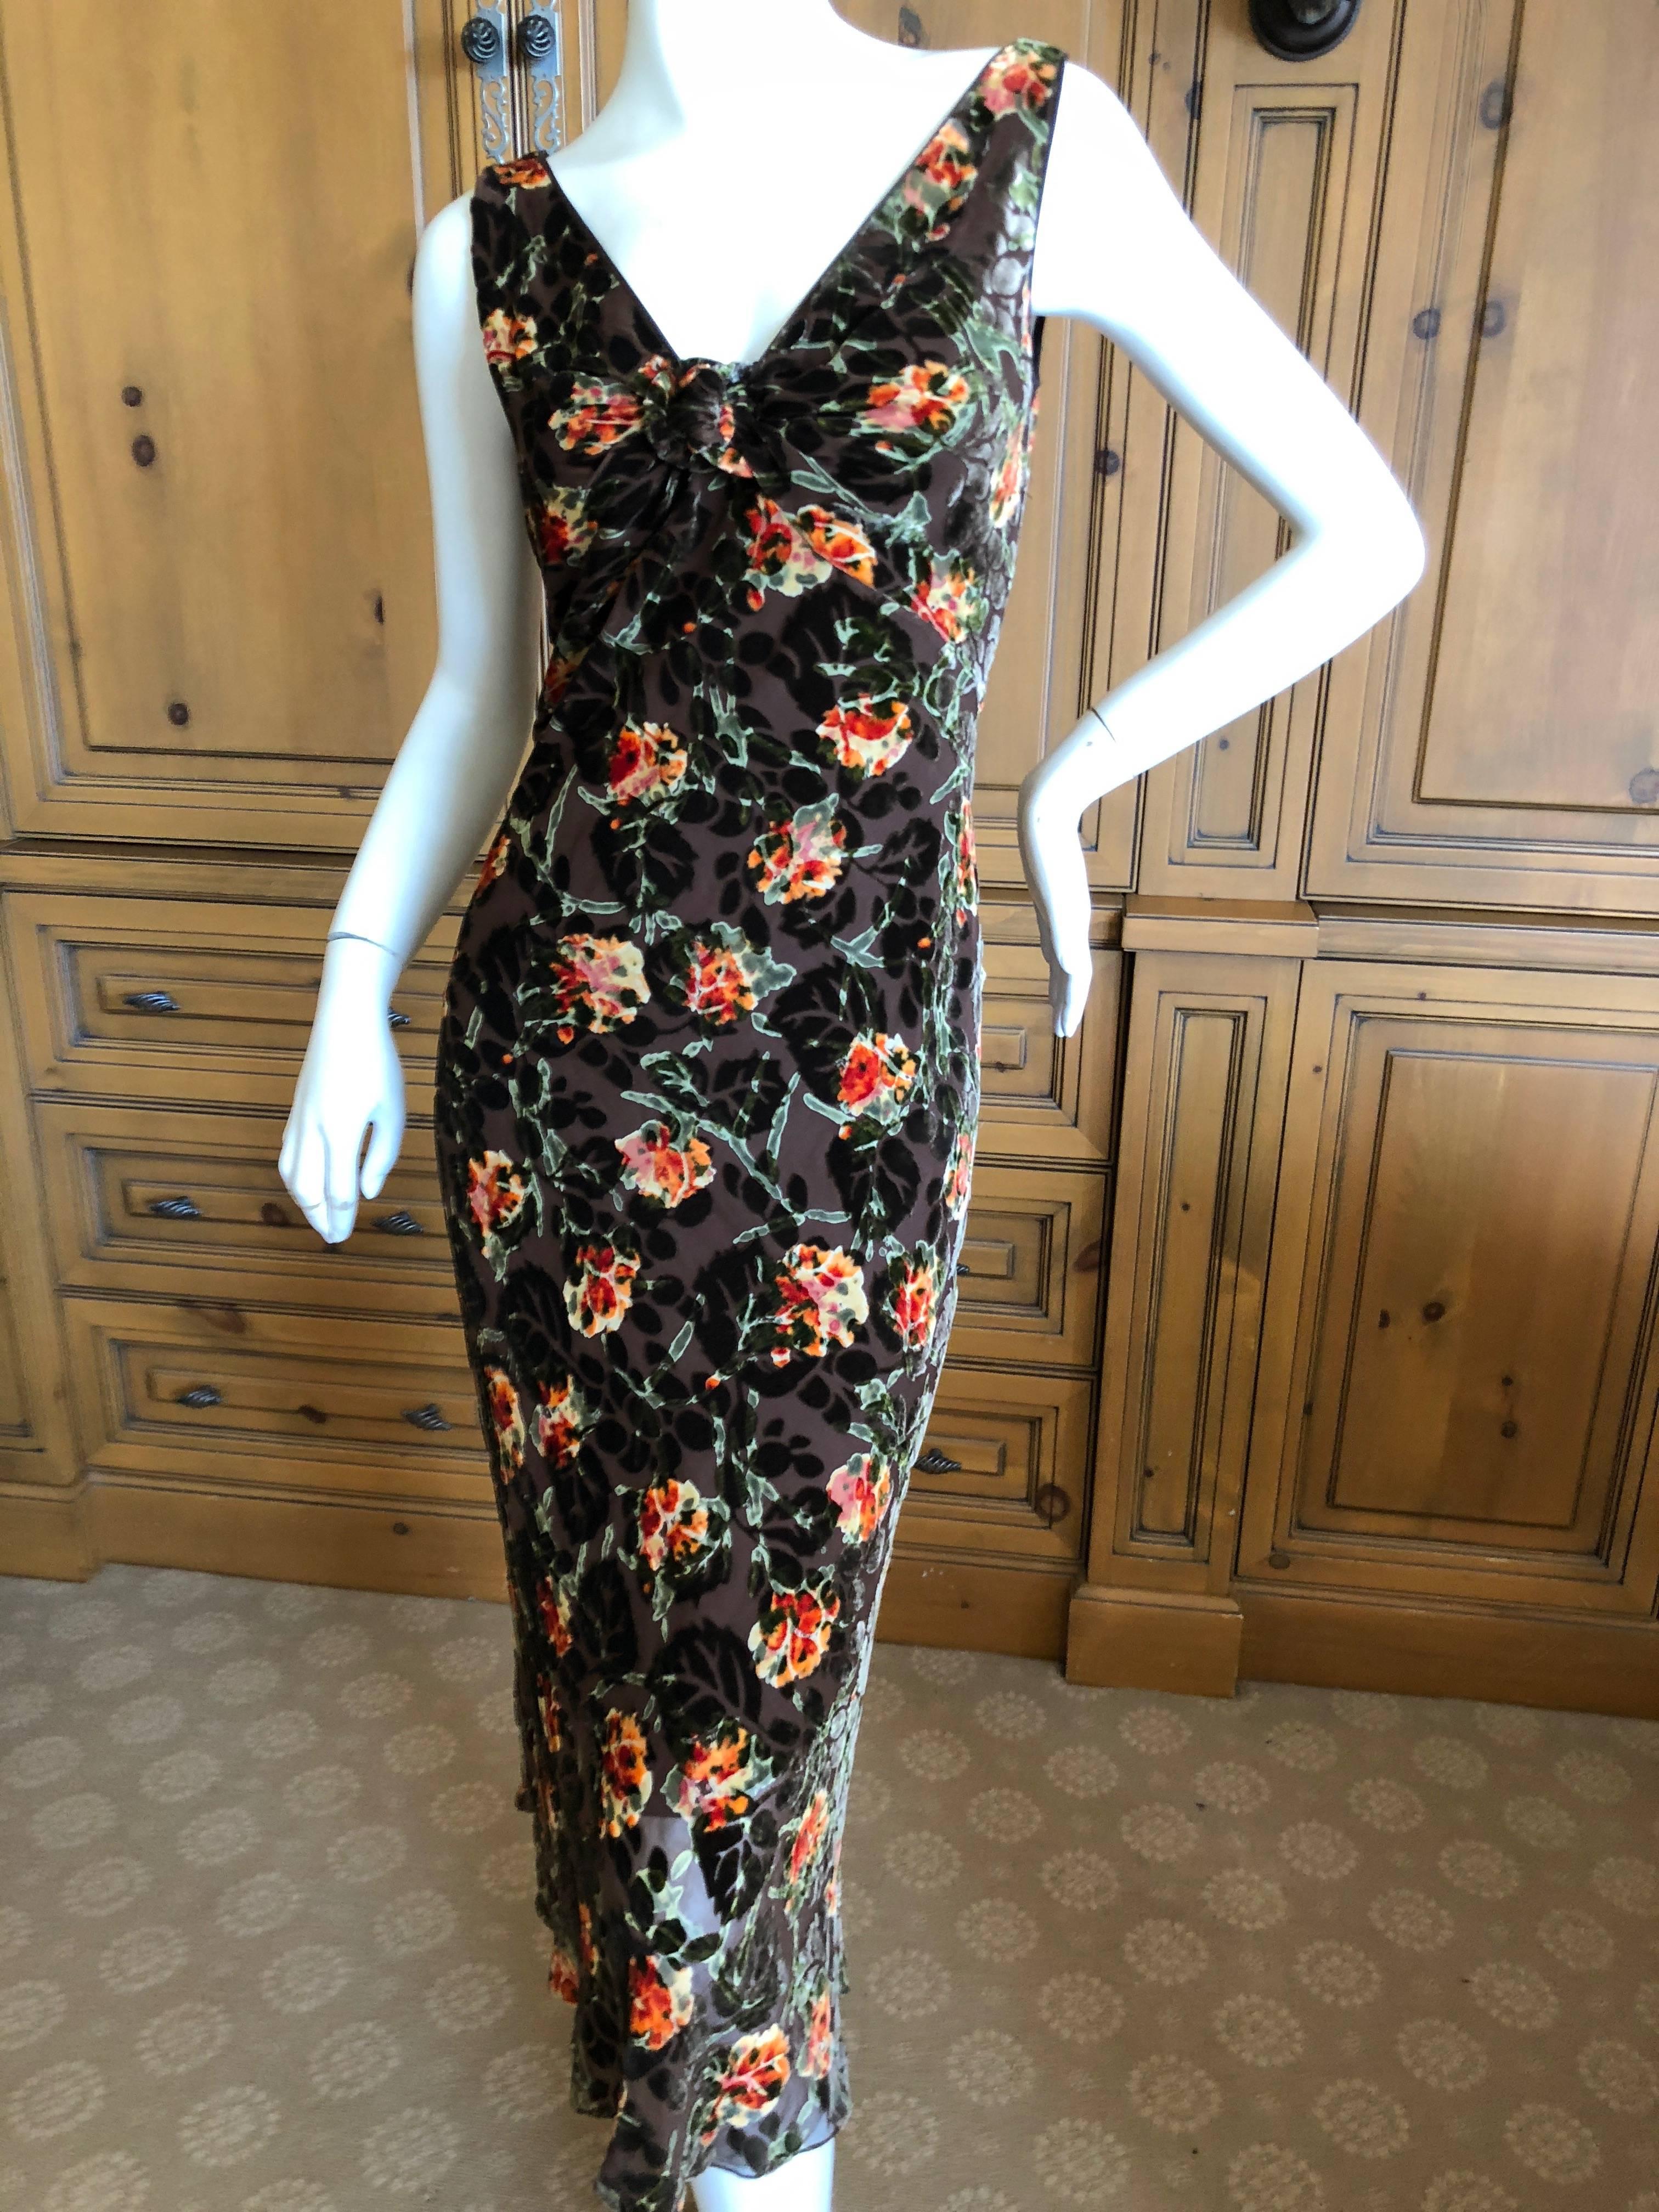 John Galliano Sheer Devore Velvet Brown Floral Cocktail Dress.
It is much prettier in person, hard to photograph the velvet flowers.
 Size 40
Bust 42